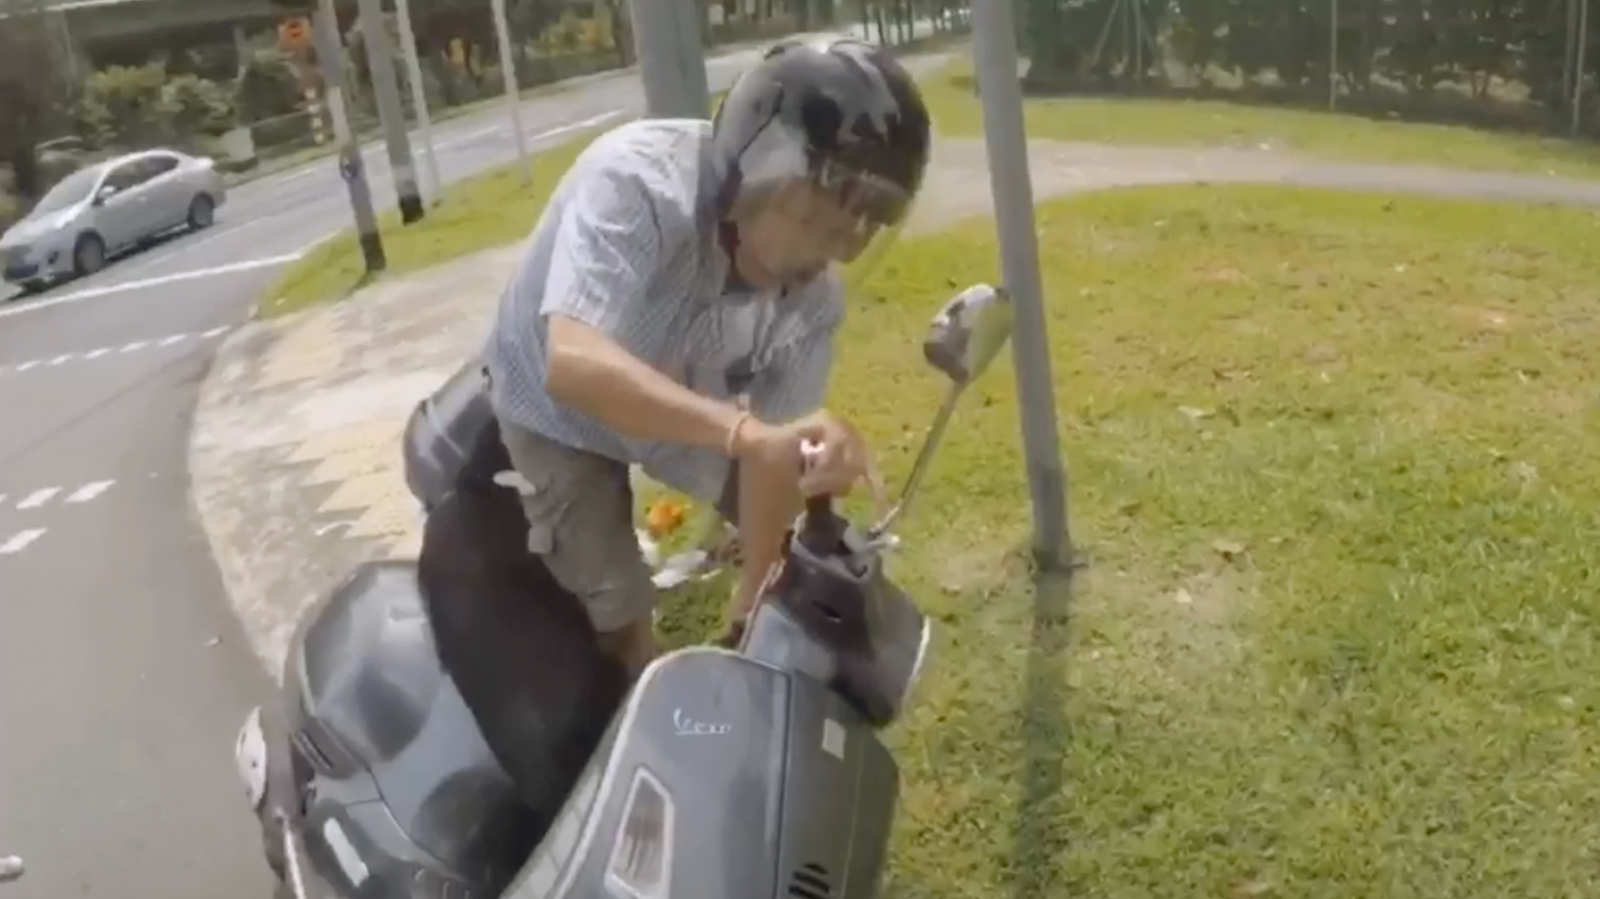 Grabfood delivery rider helps elderly motorcyclist who fell off his bike